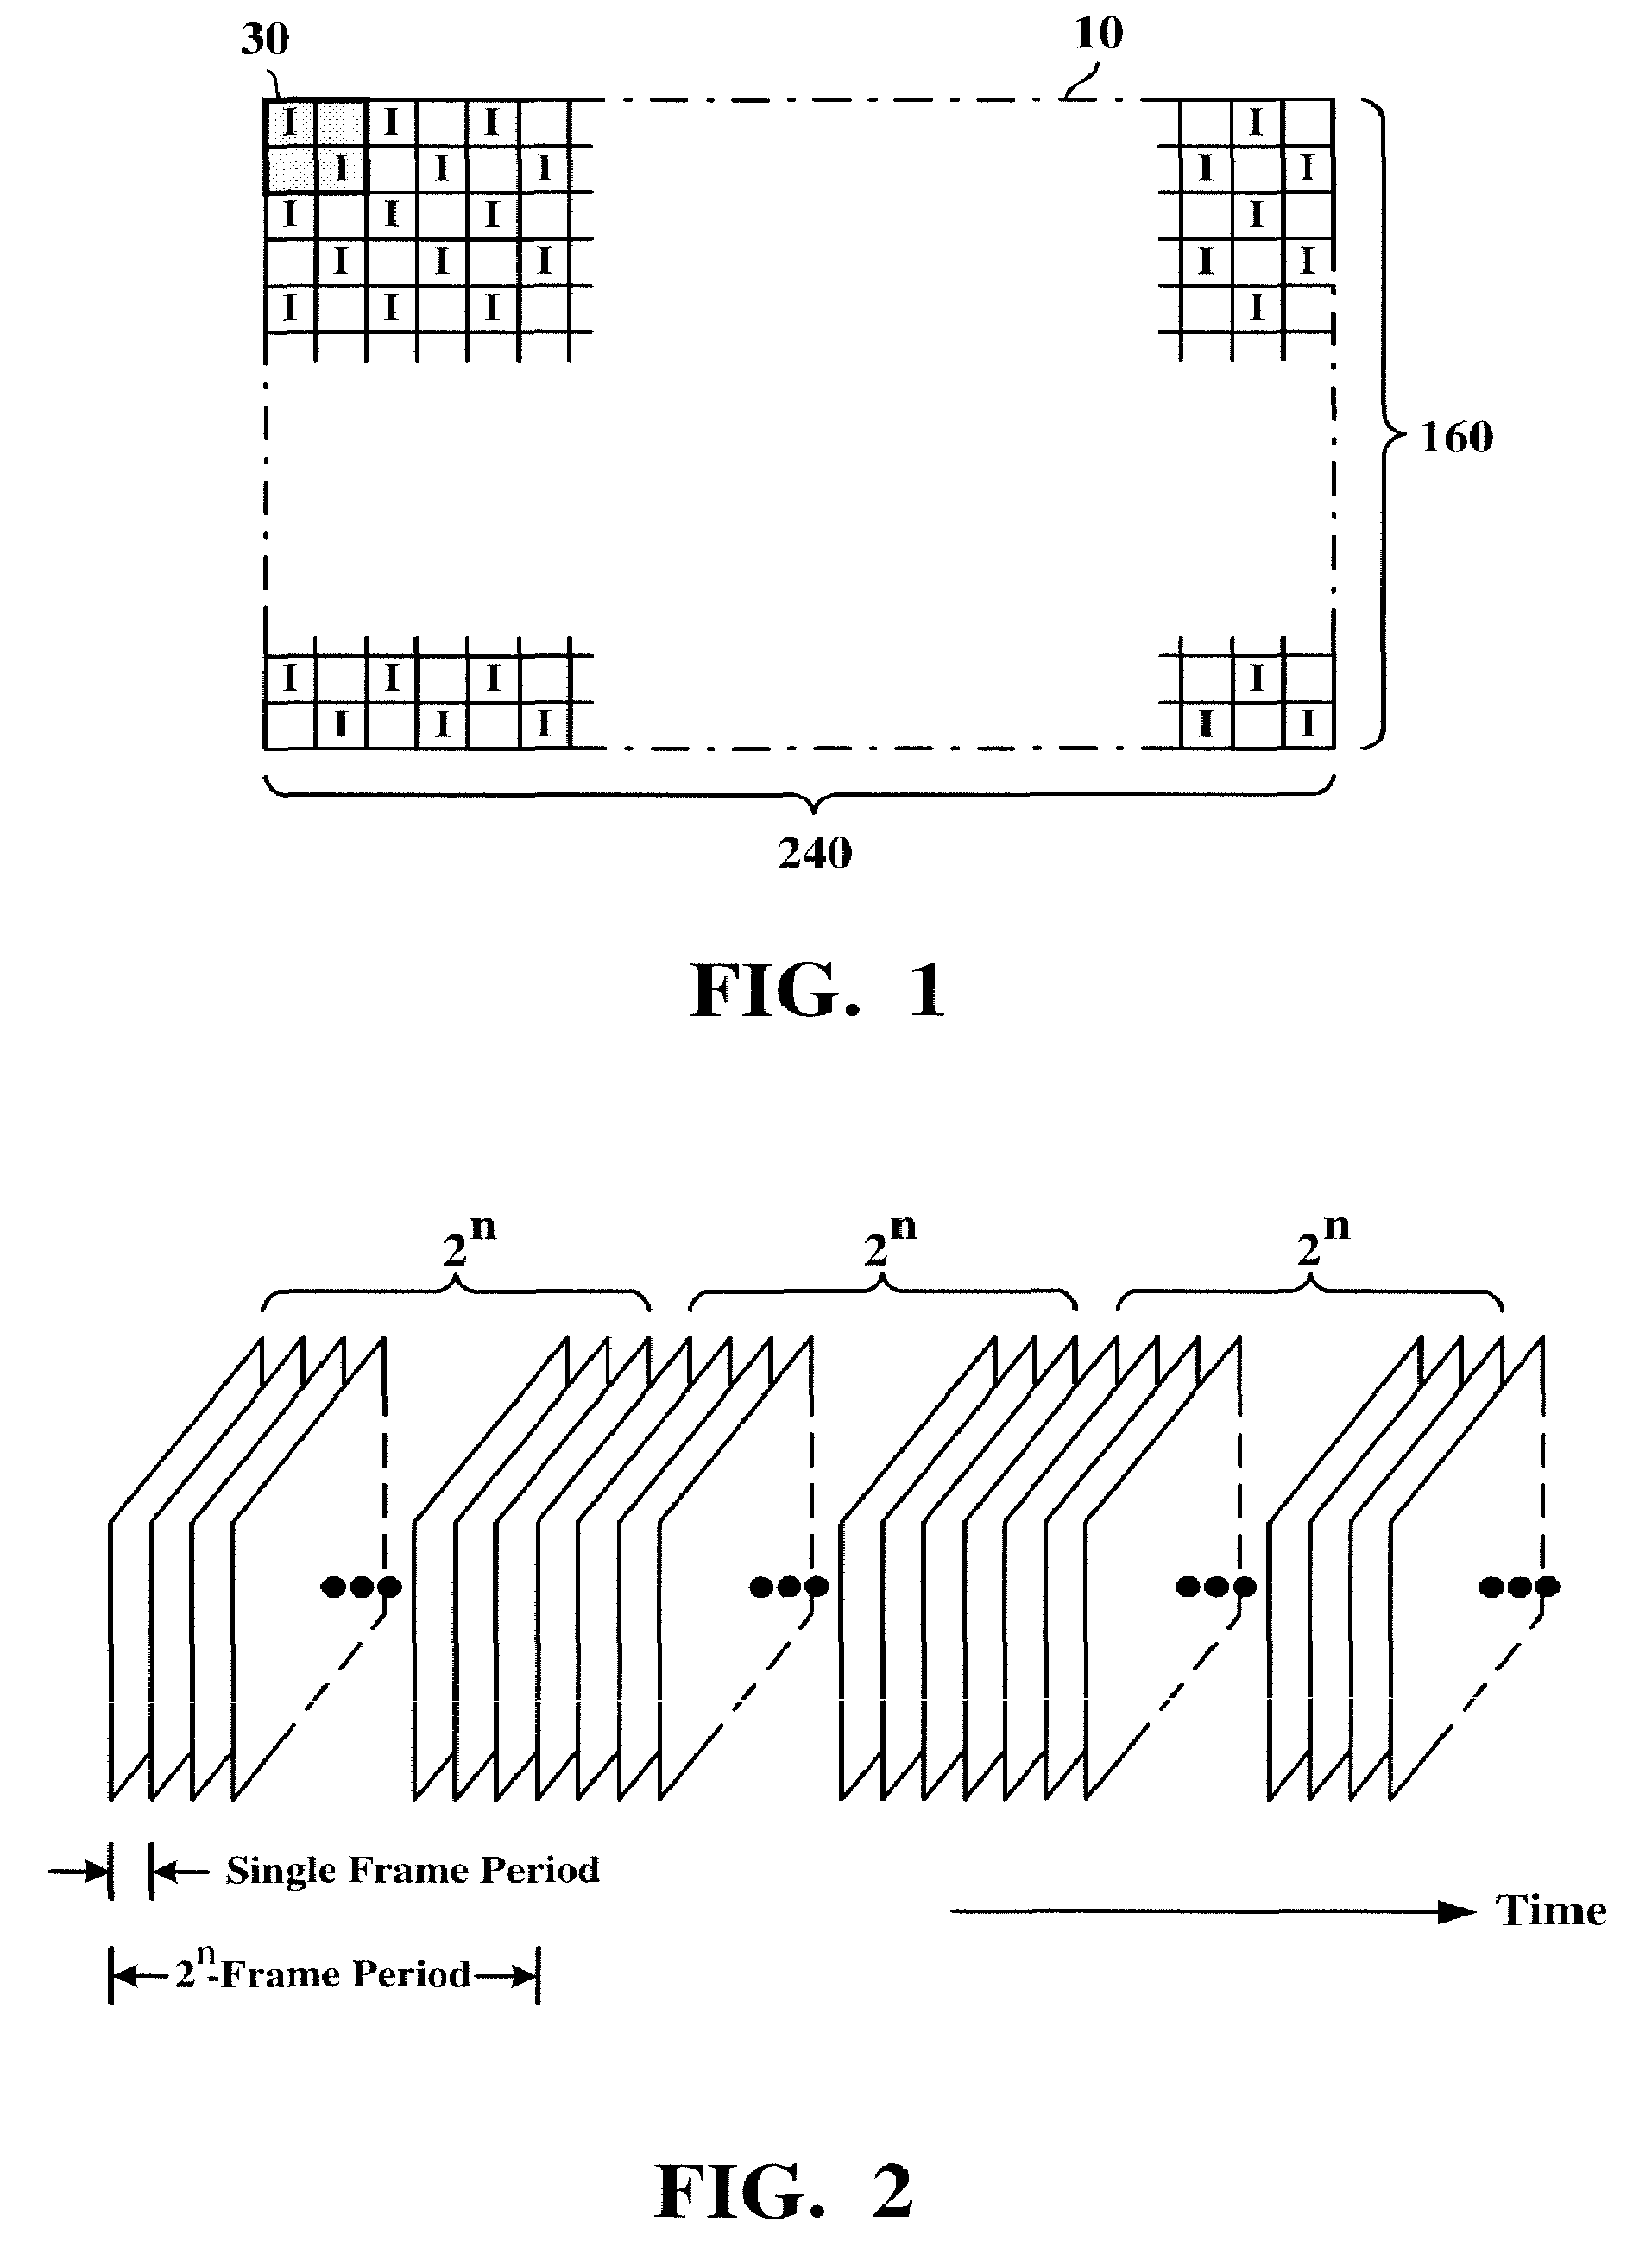 Display controller for producing multi-gradation images